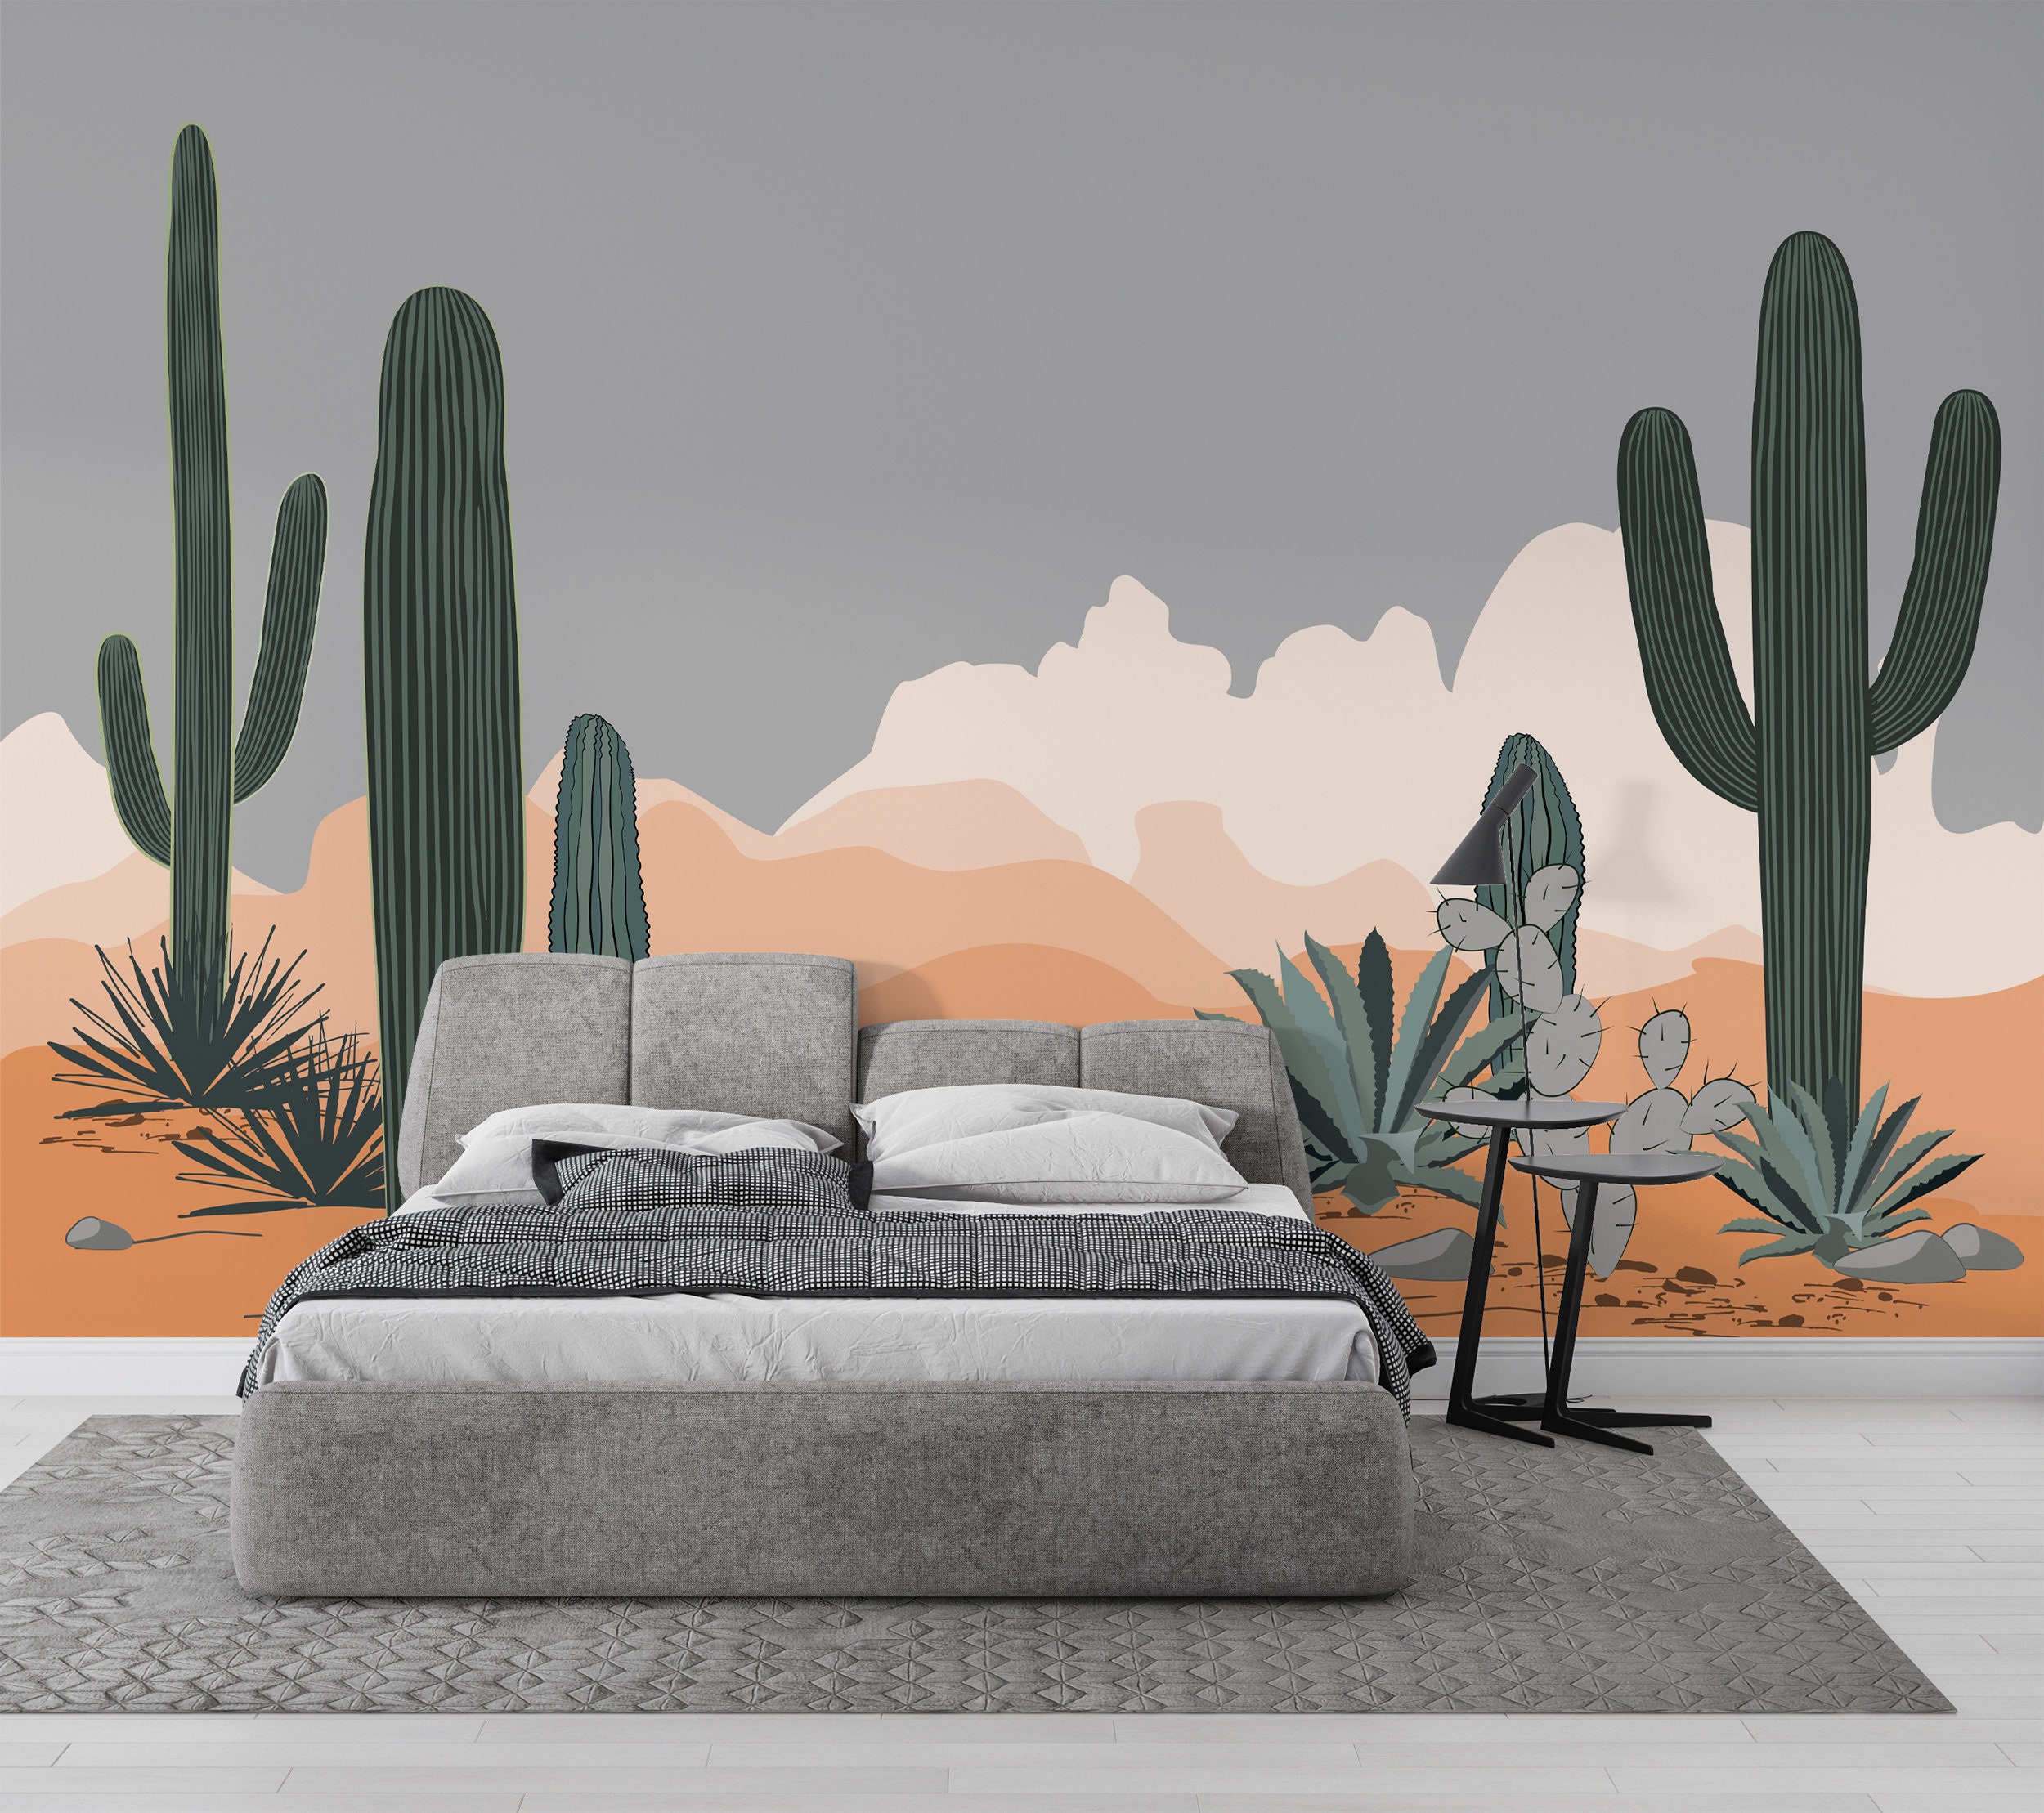 Desert Agave and Saguaro Cacti Mountains Background Wallpaper Nursery  Children Kids Room Mural Home Decor Wall Art Removable